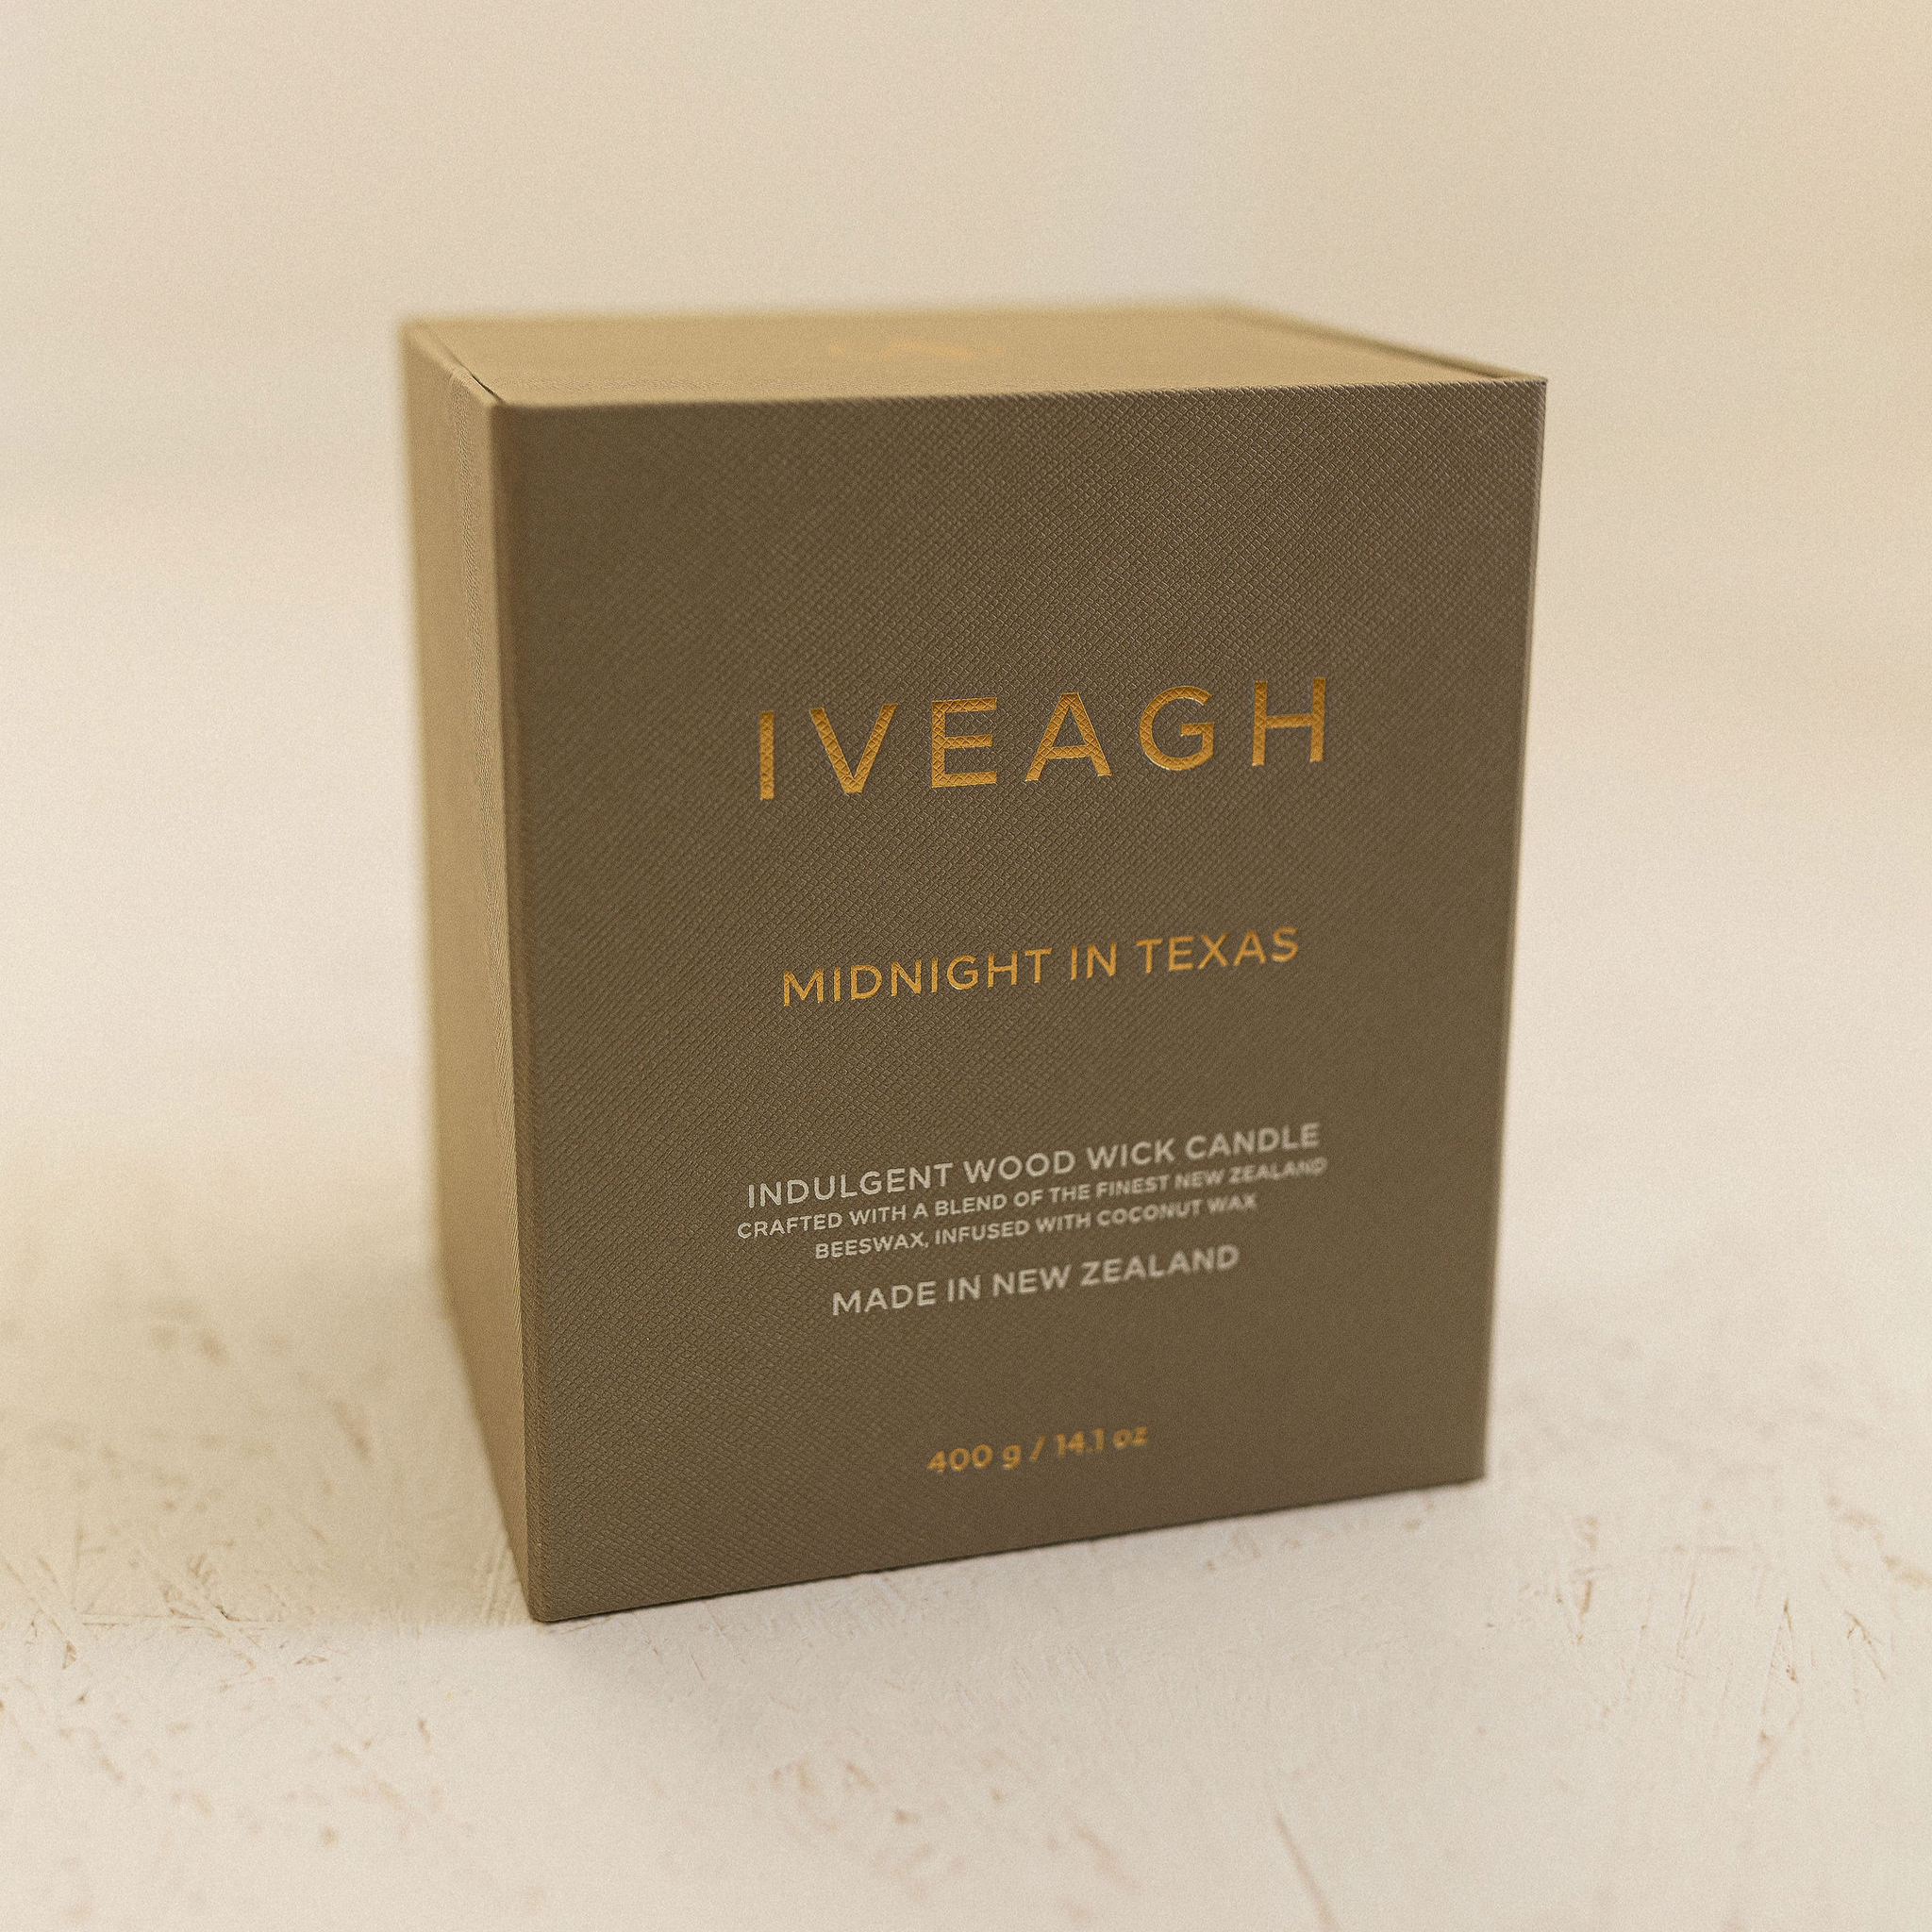 IVEAGH - Midnight in Texas